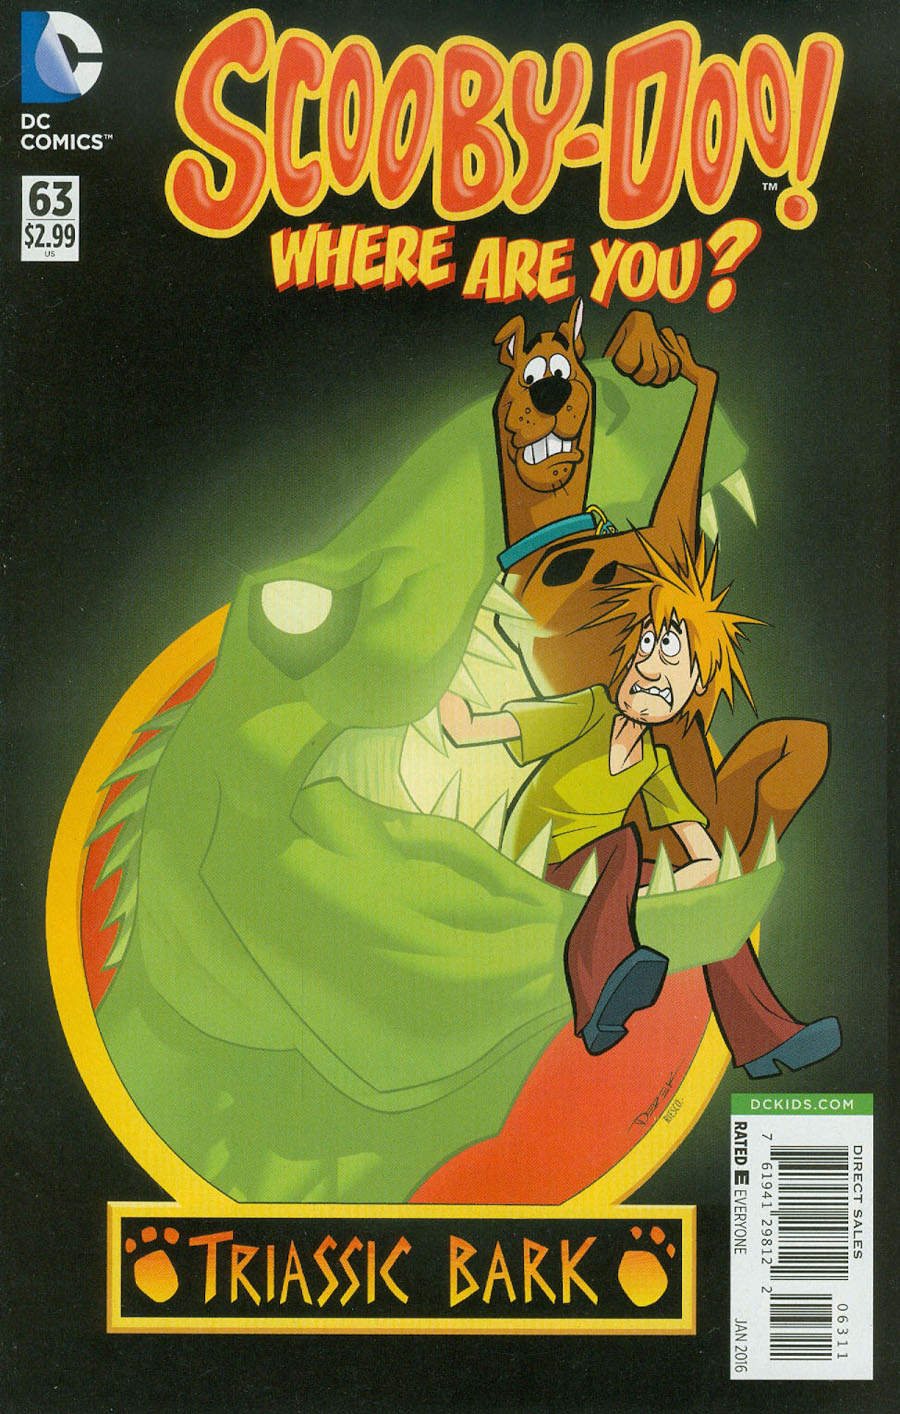 Scooby-Doo Where Are You #63